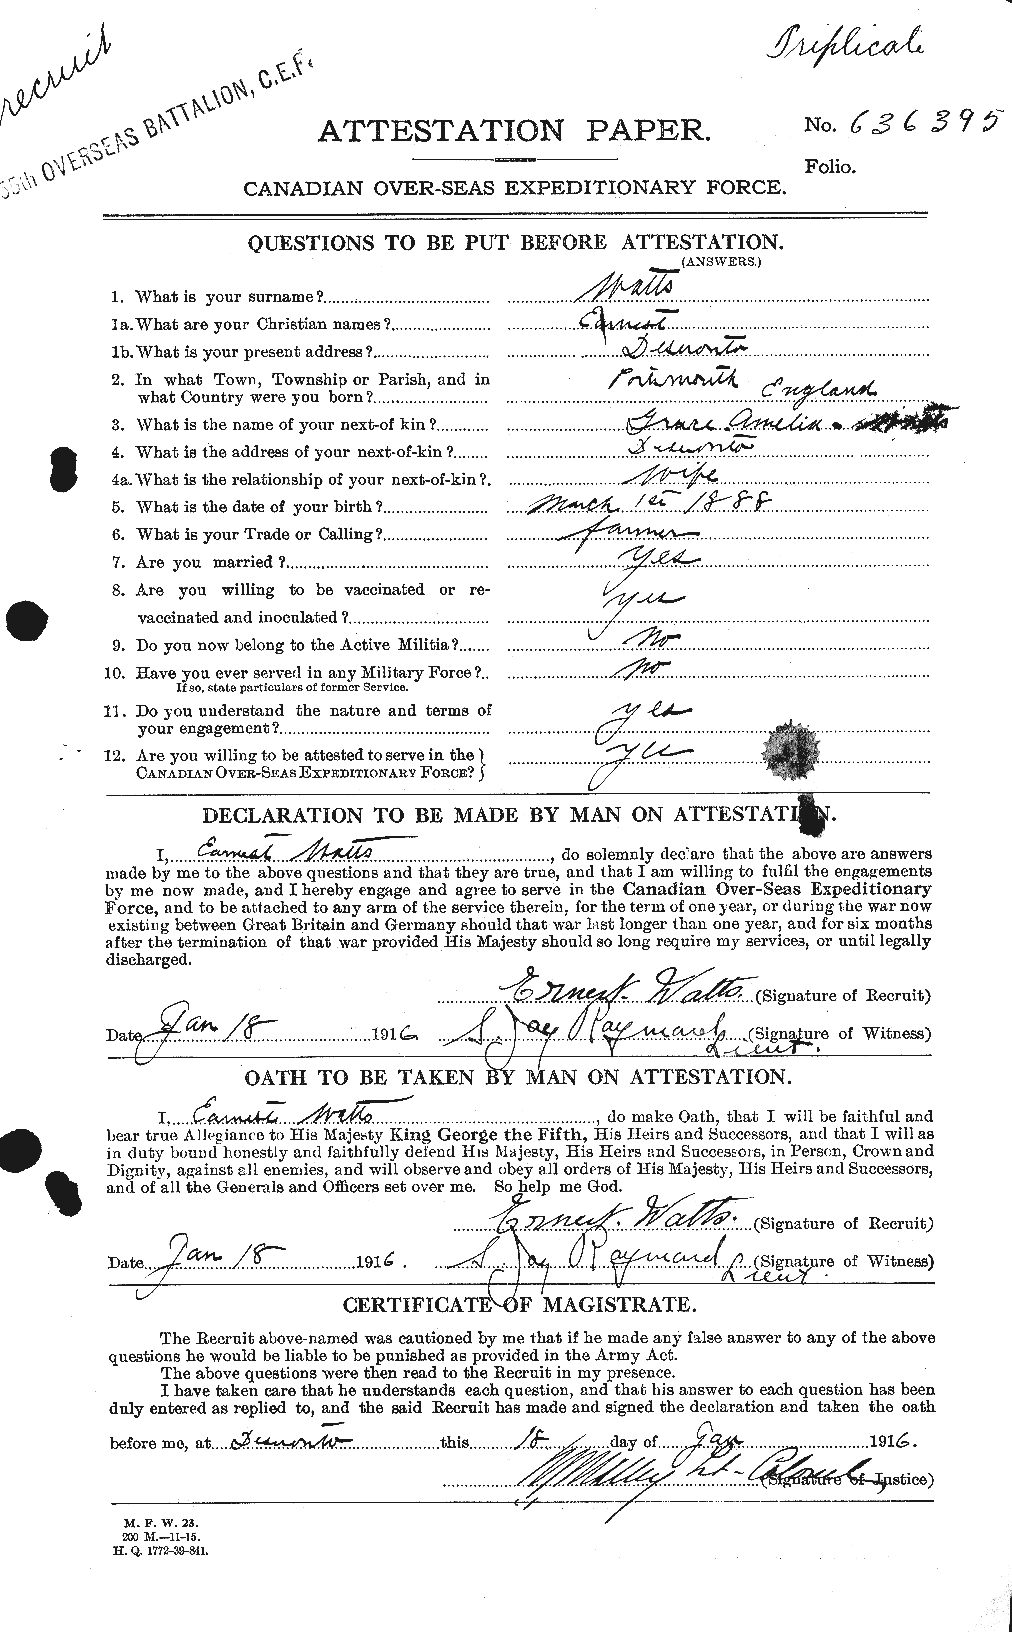 Personnel Records of the First World War - CEF 662746a